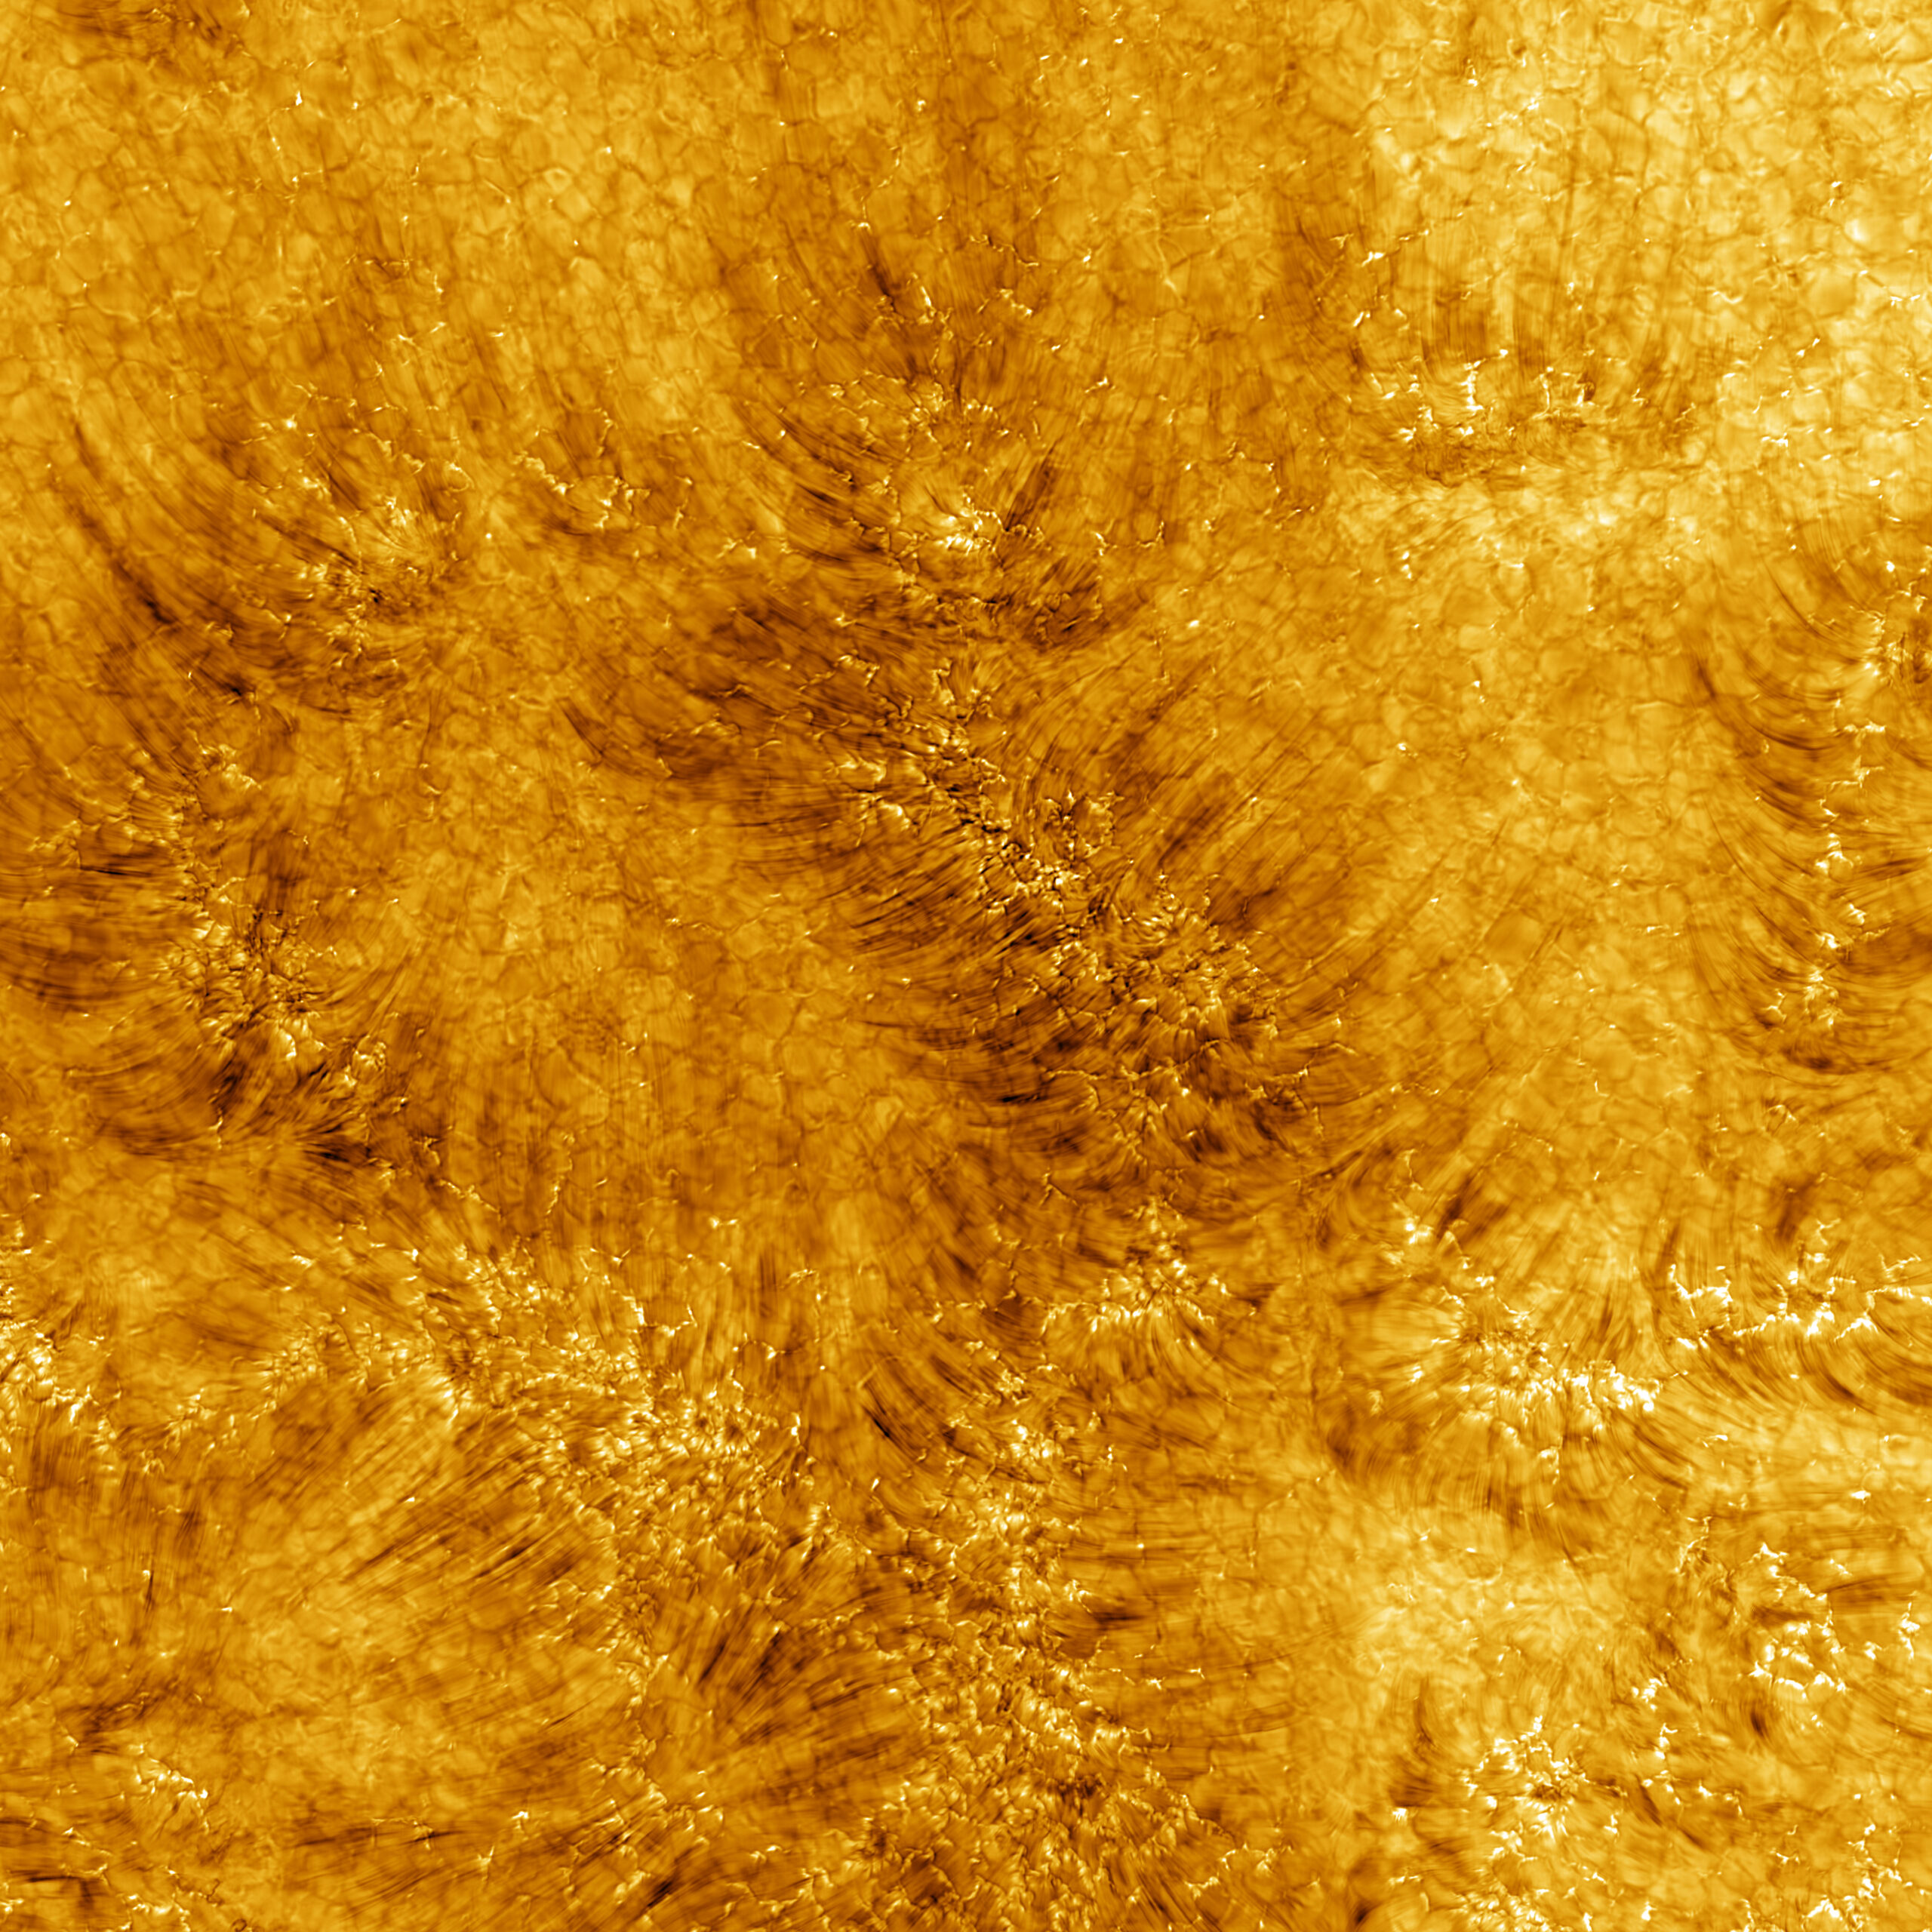 See the horror of the sun up close from world’s most powerful solar telescope